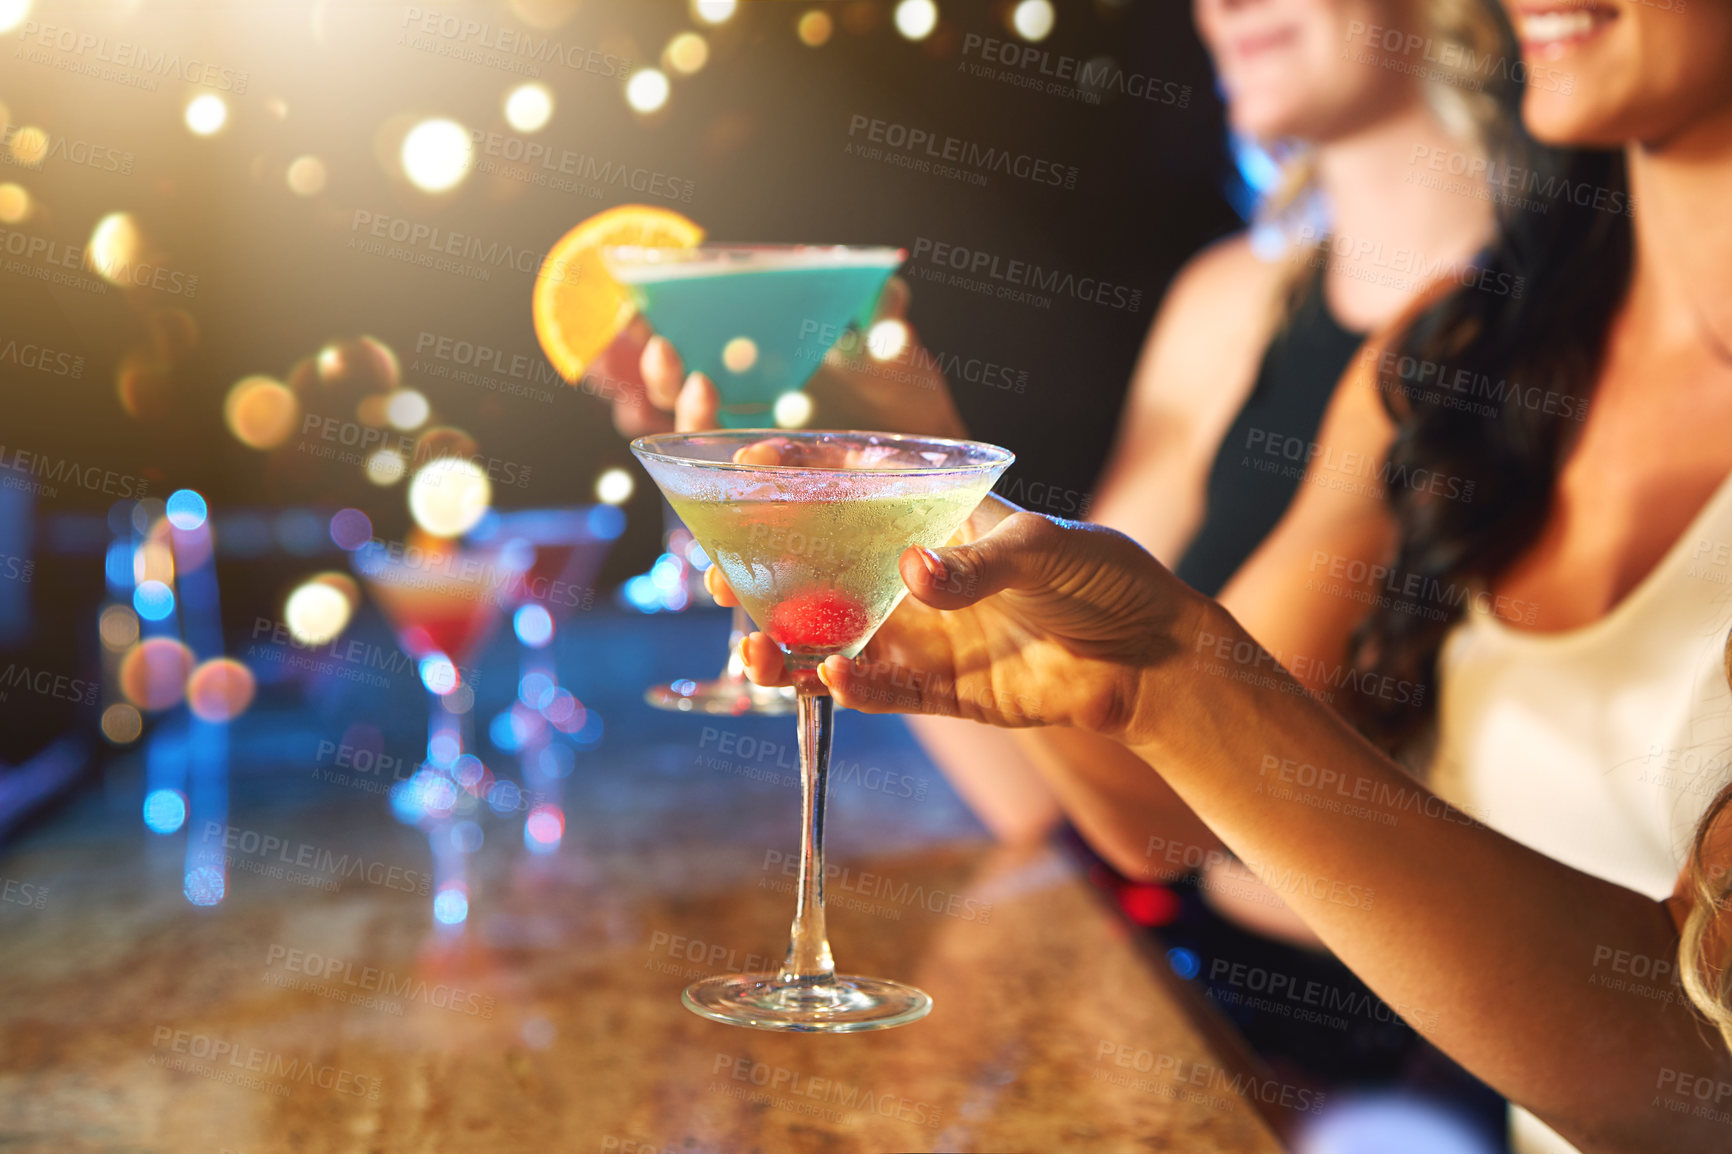 Buy stock photo Cropped shot of women drinking cocktails in a nightclub